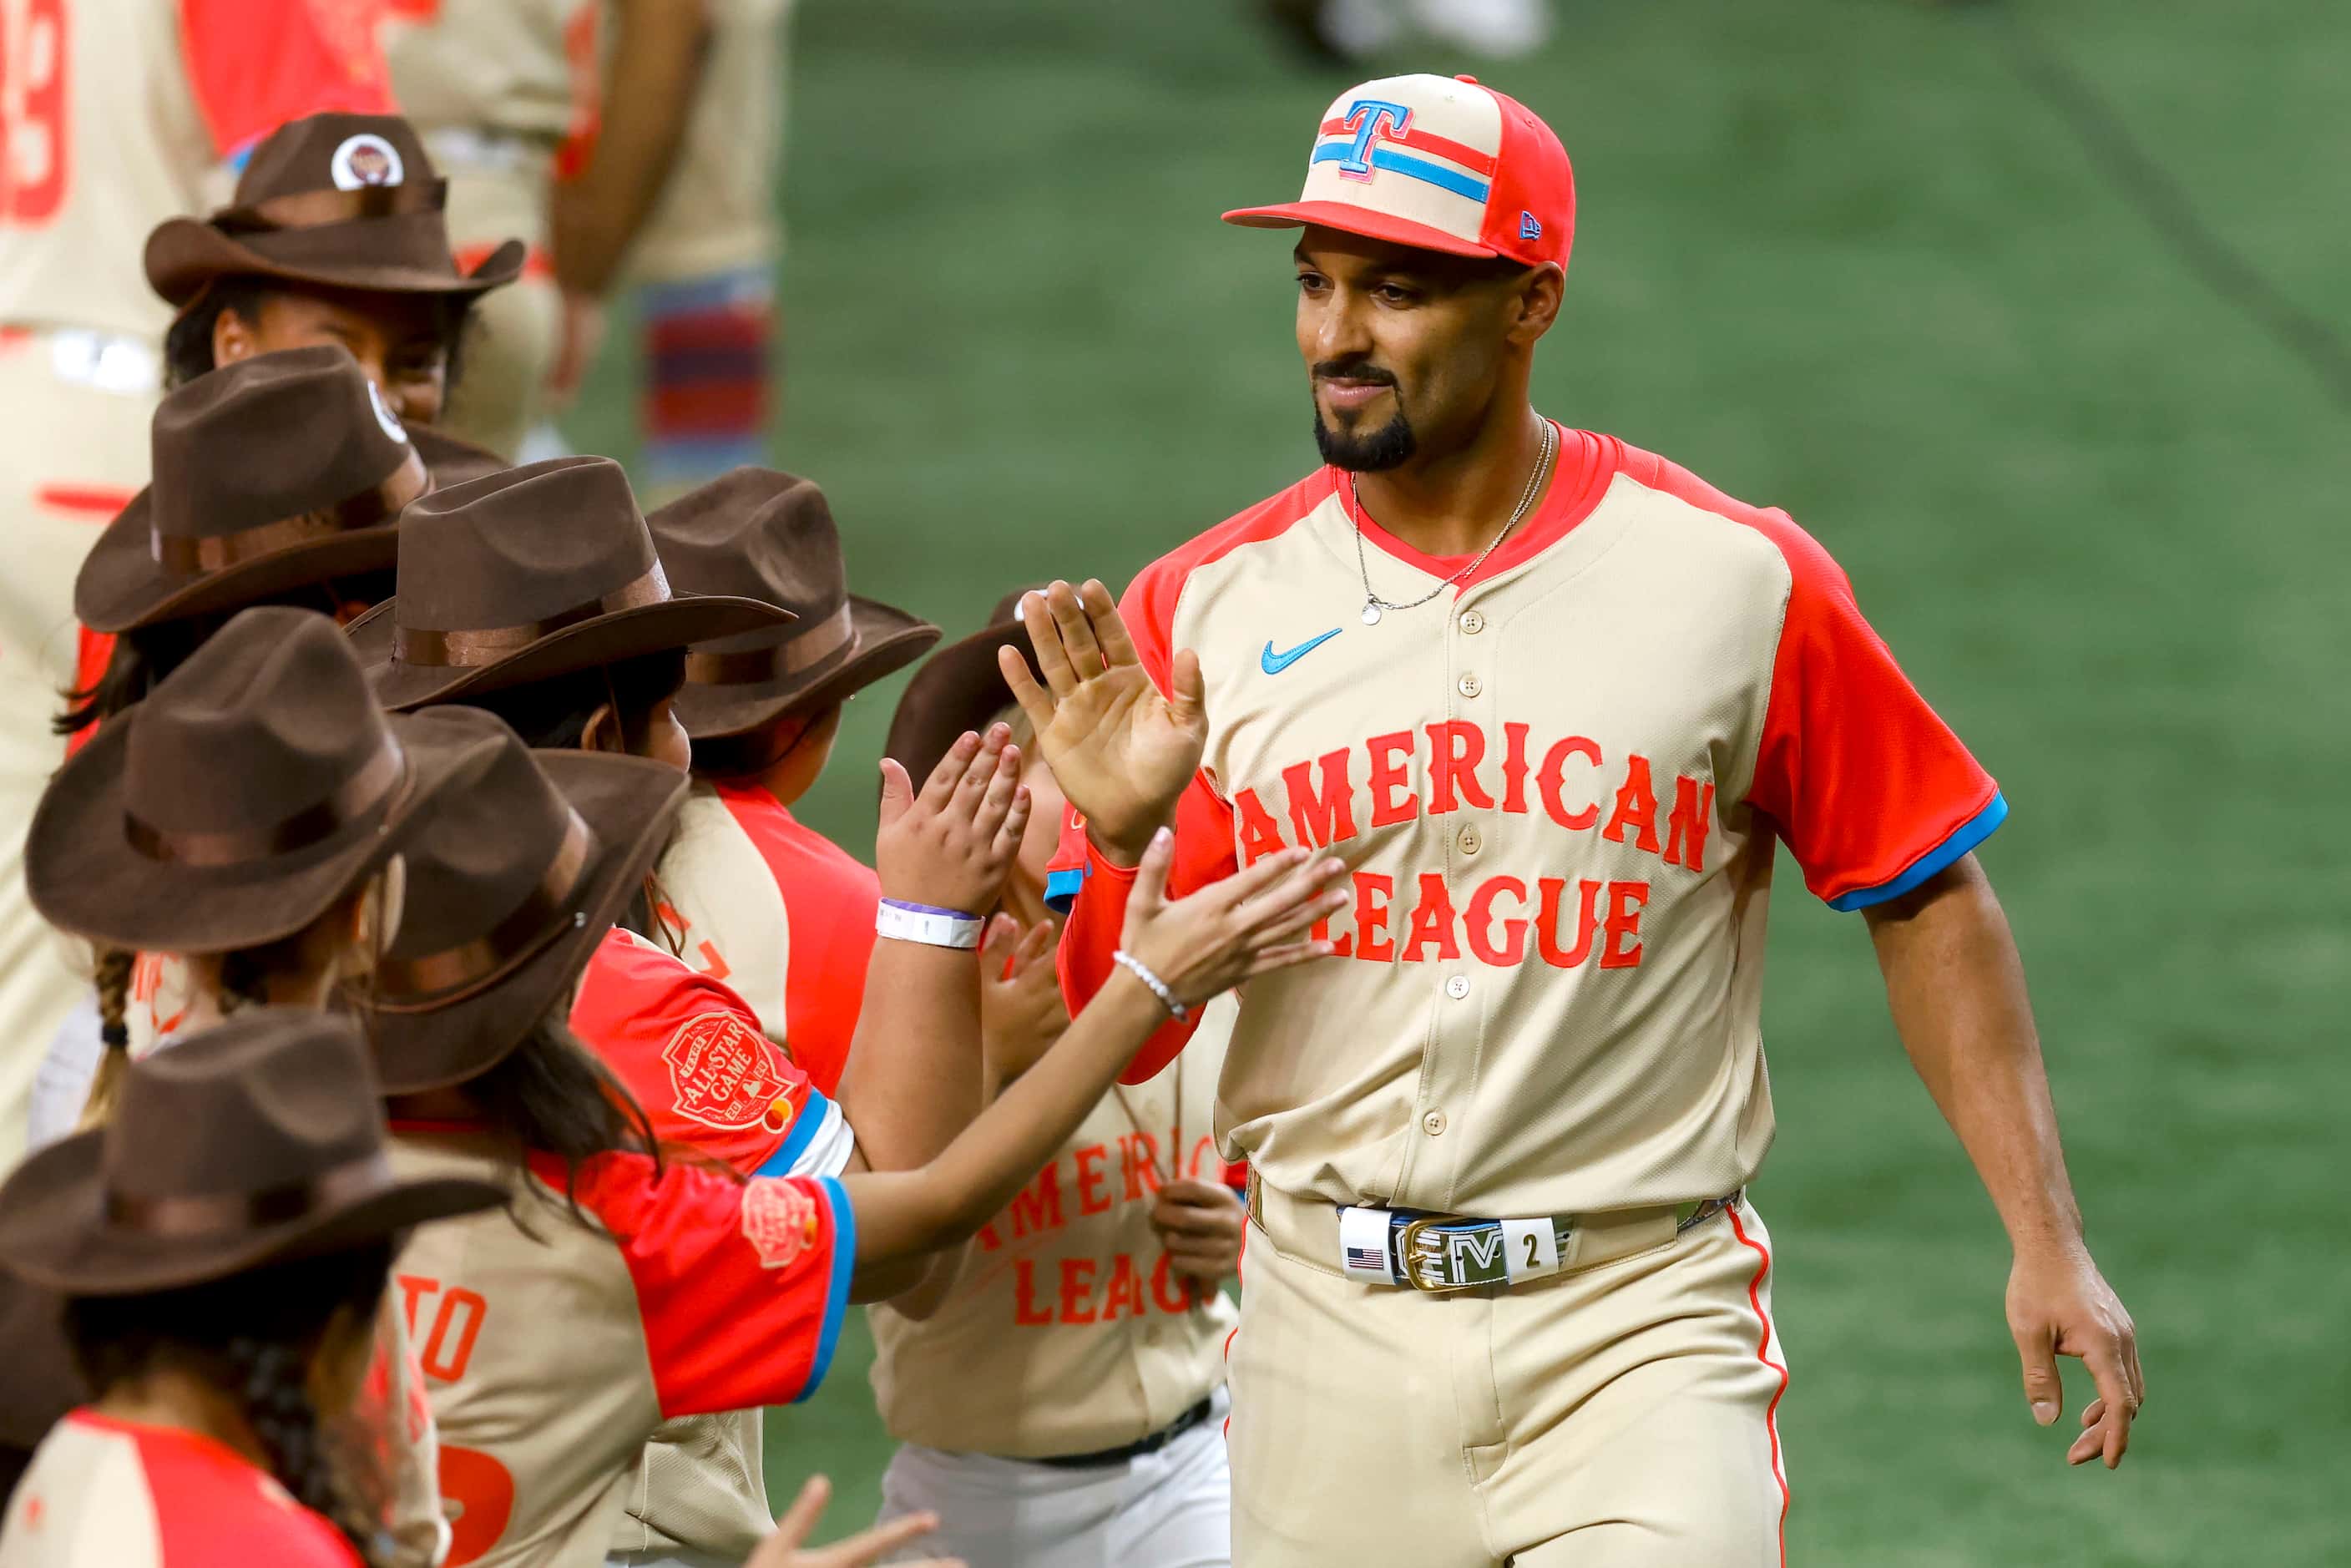 American League's Marcus Semien, of the Texas Rangers, high-fives children on the field as...